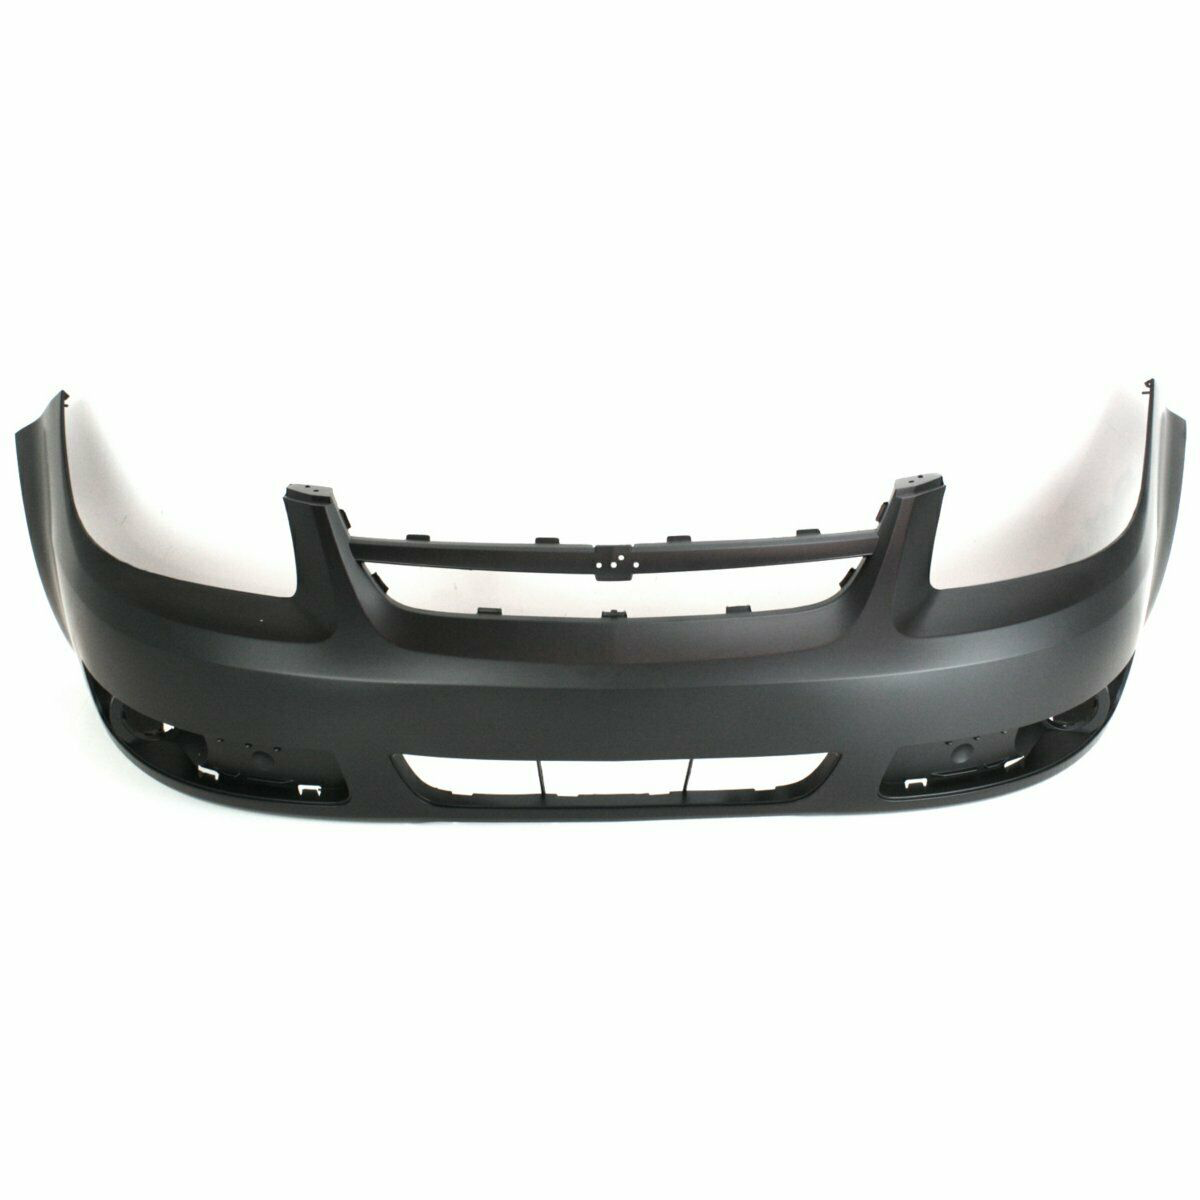 2005-2010 Chevy Cobalt Front Bumper Painted to Match